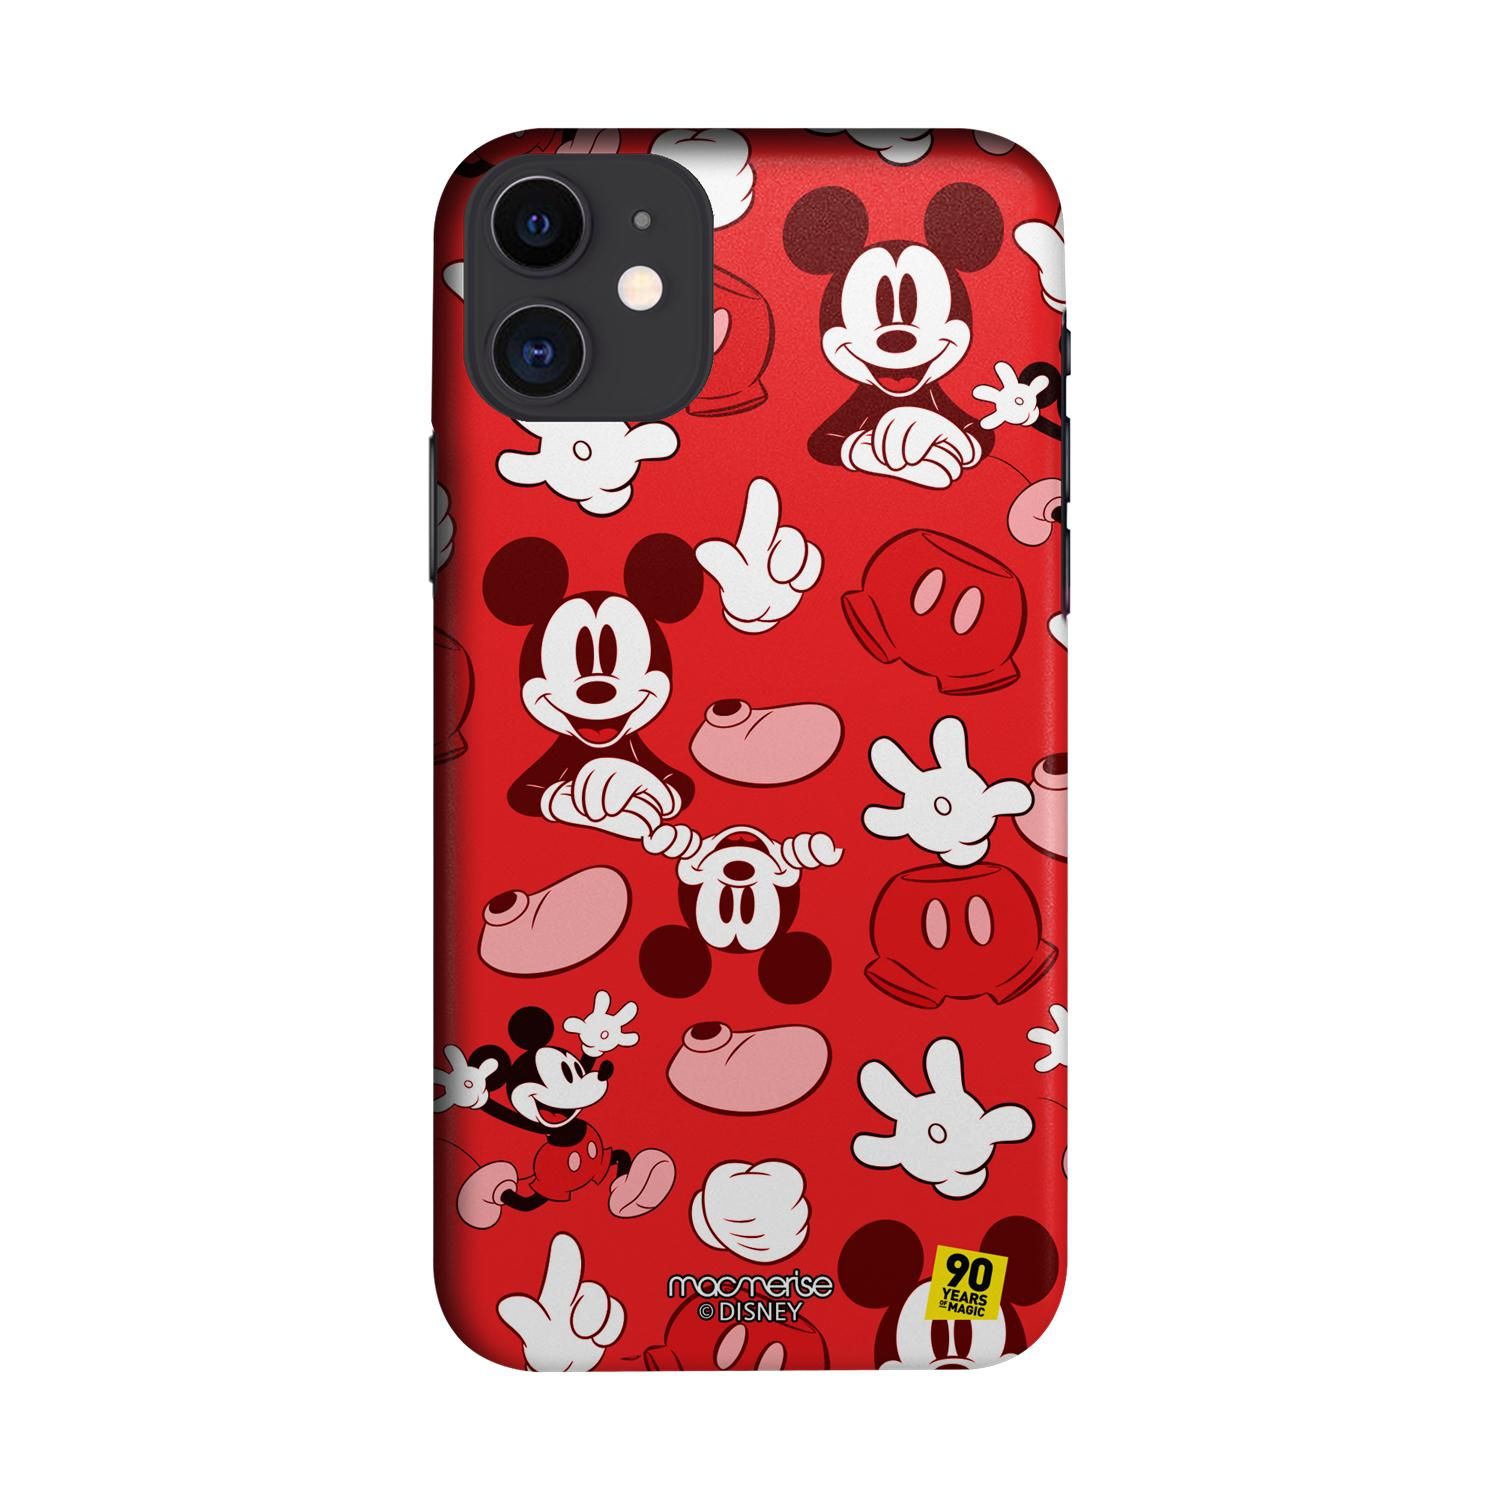 Buy Mickey classic Red - Sleek Phone Case for iPhone 11 Online